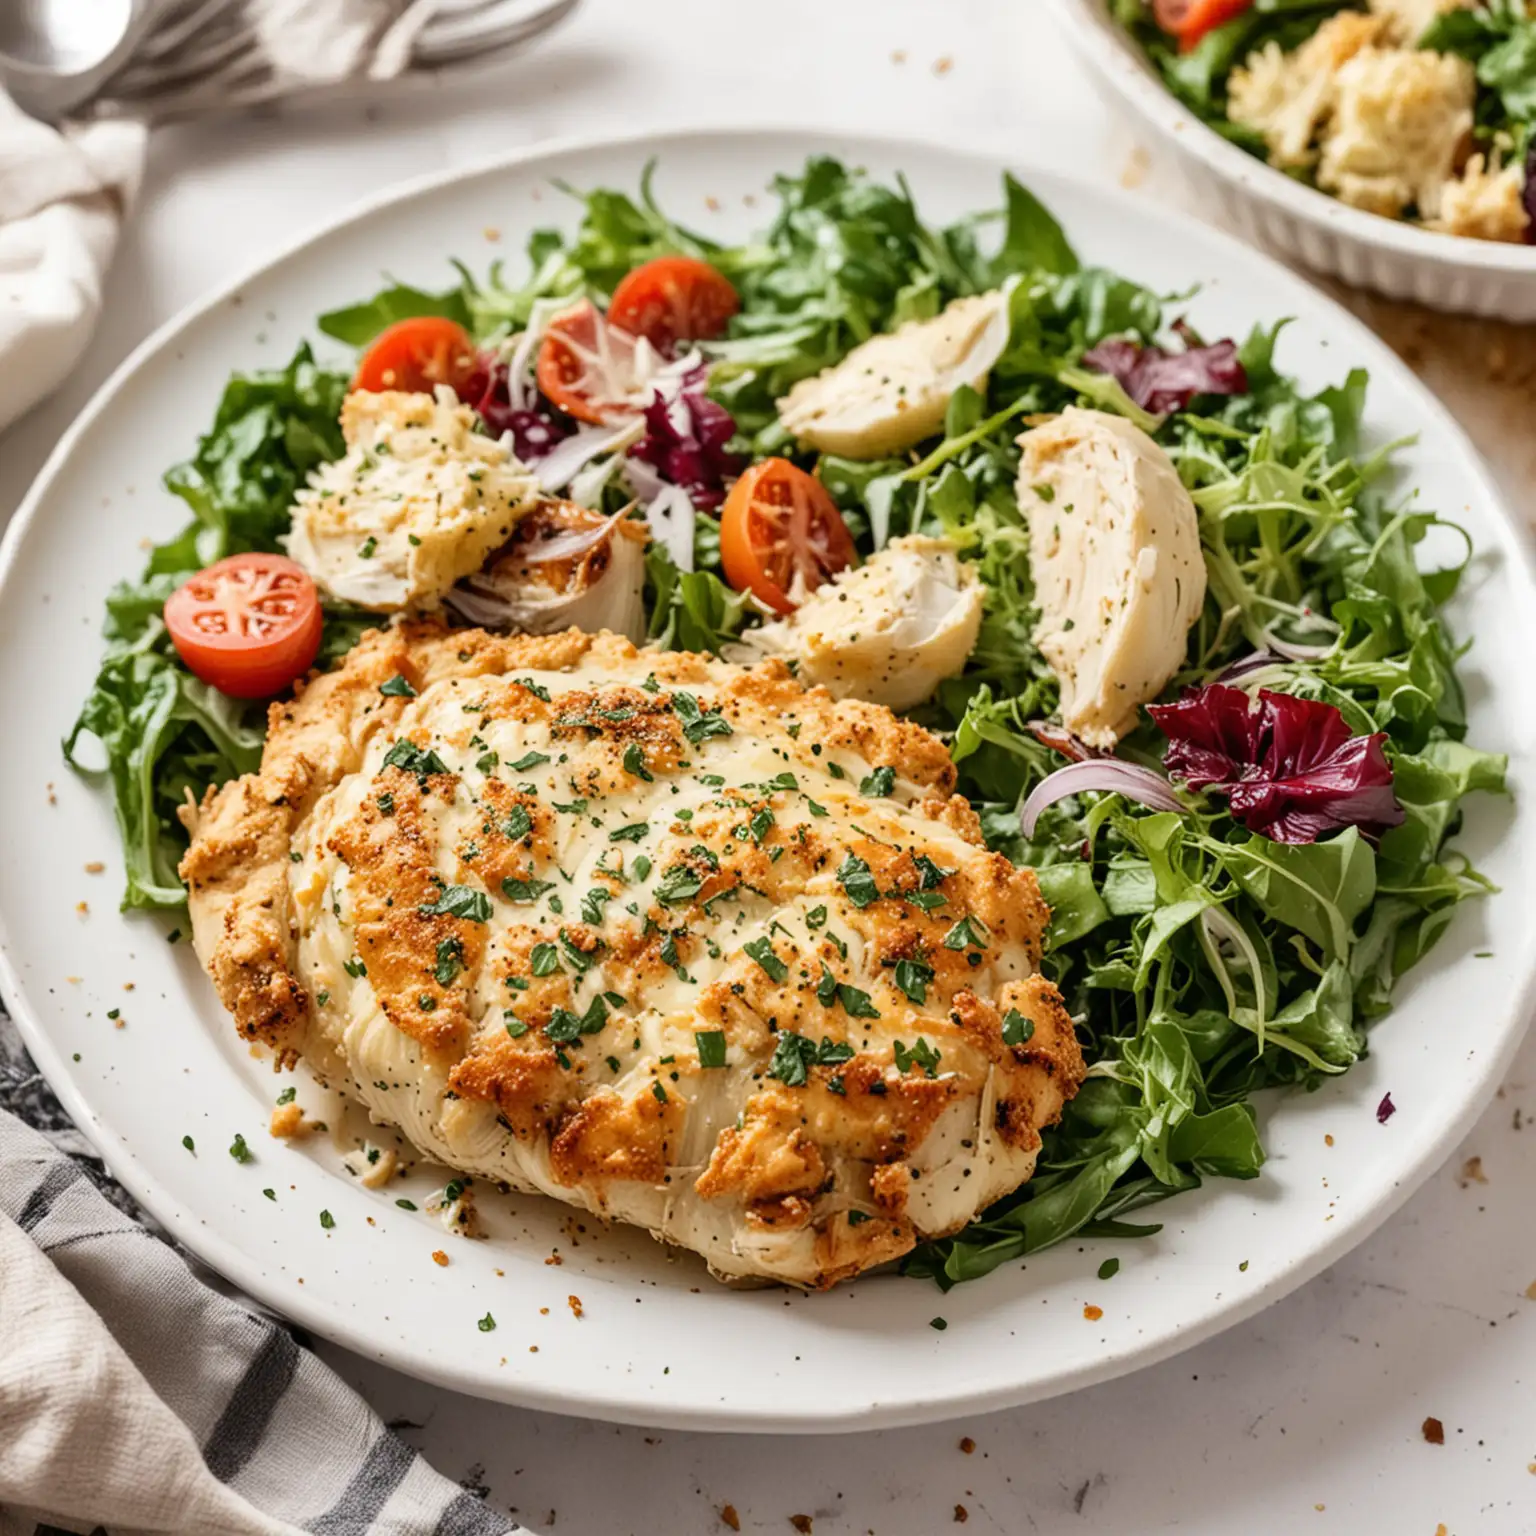 Baked Garlic Parmesan Chicken in a plate with salad
